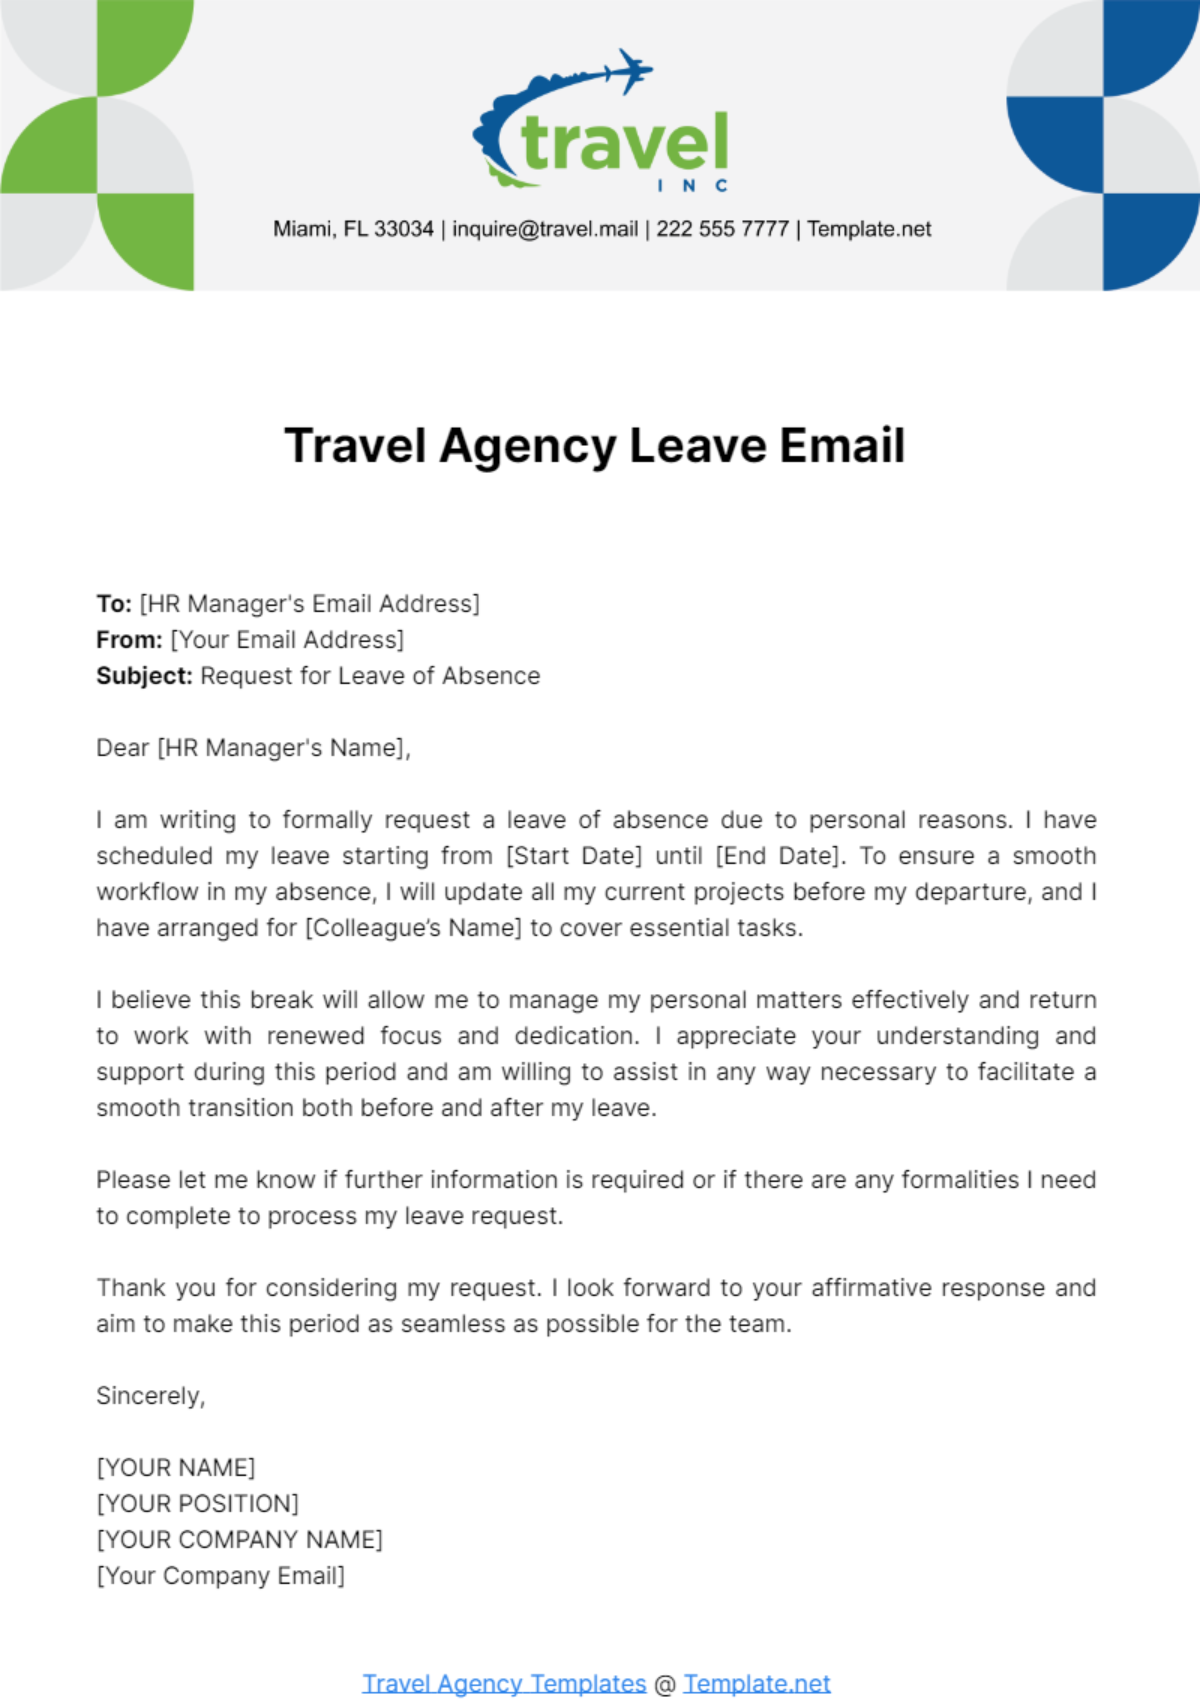 Free Travel Agency Leave Email Template